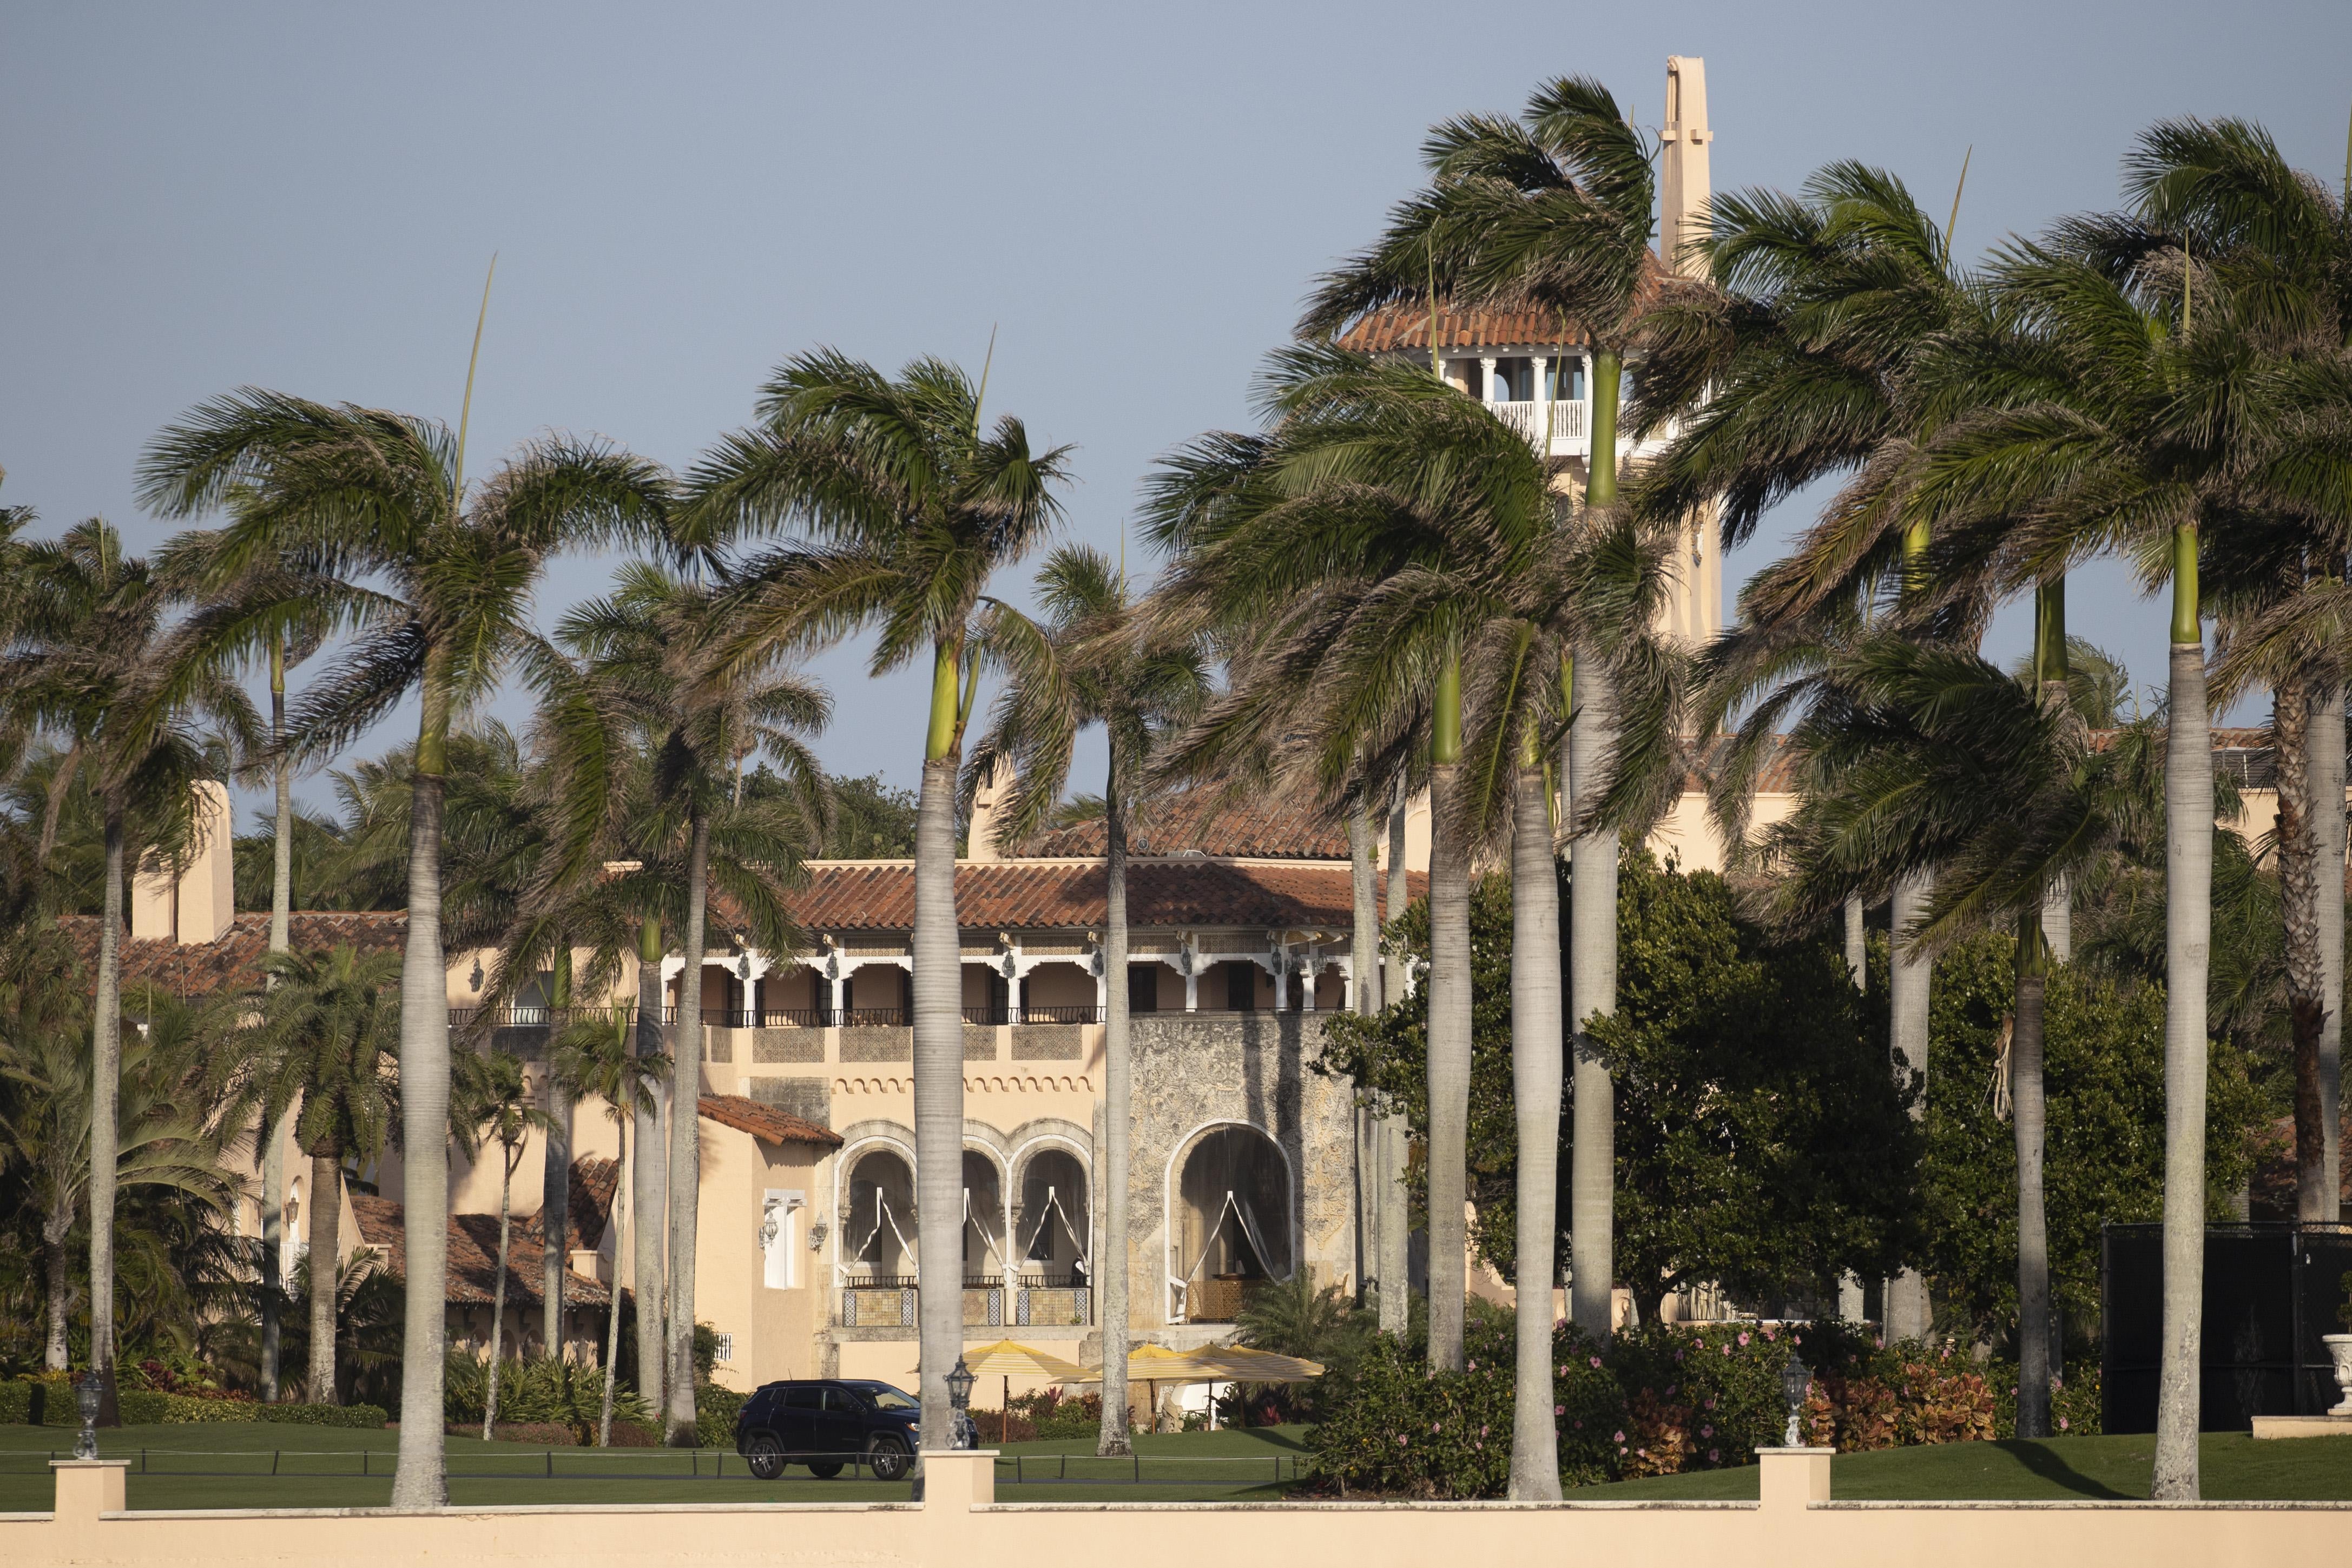 A Spanish-style villa building, in a manicured lawn, with palm trees blowing in the wind.